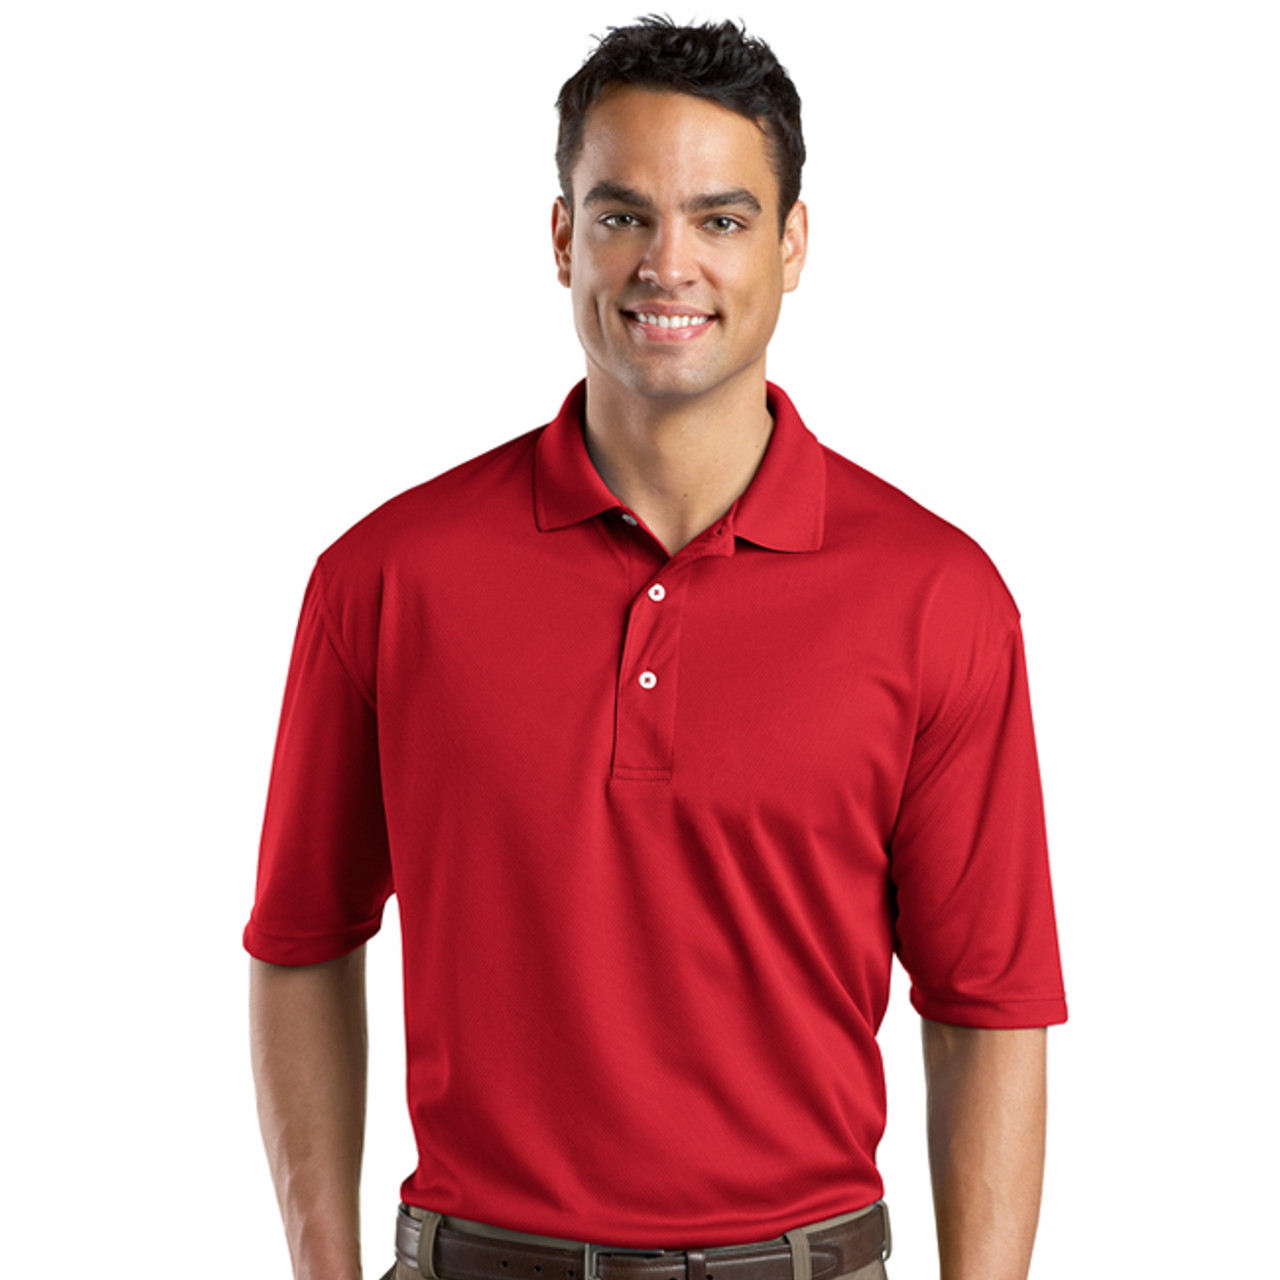 Embroidered performance sport shirt